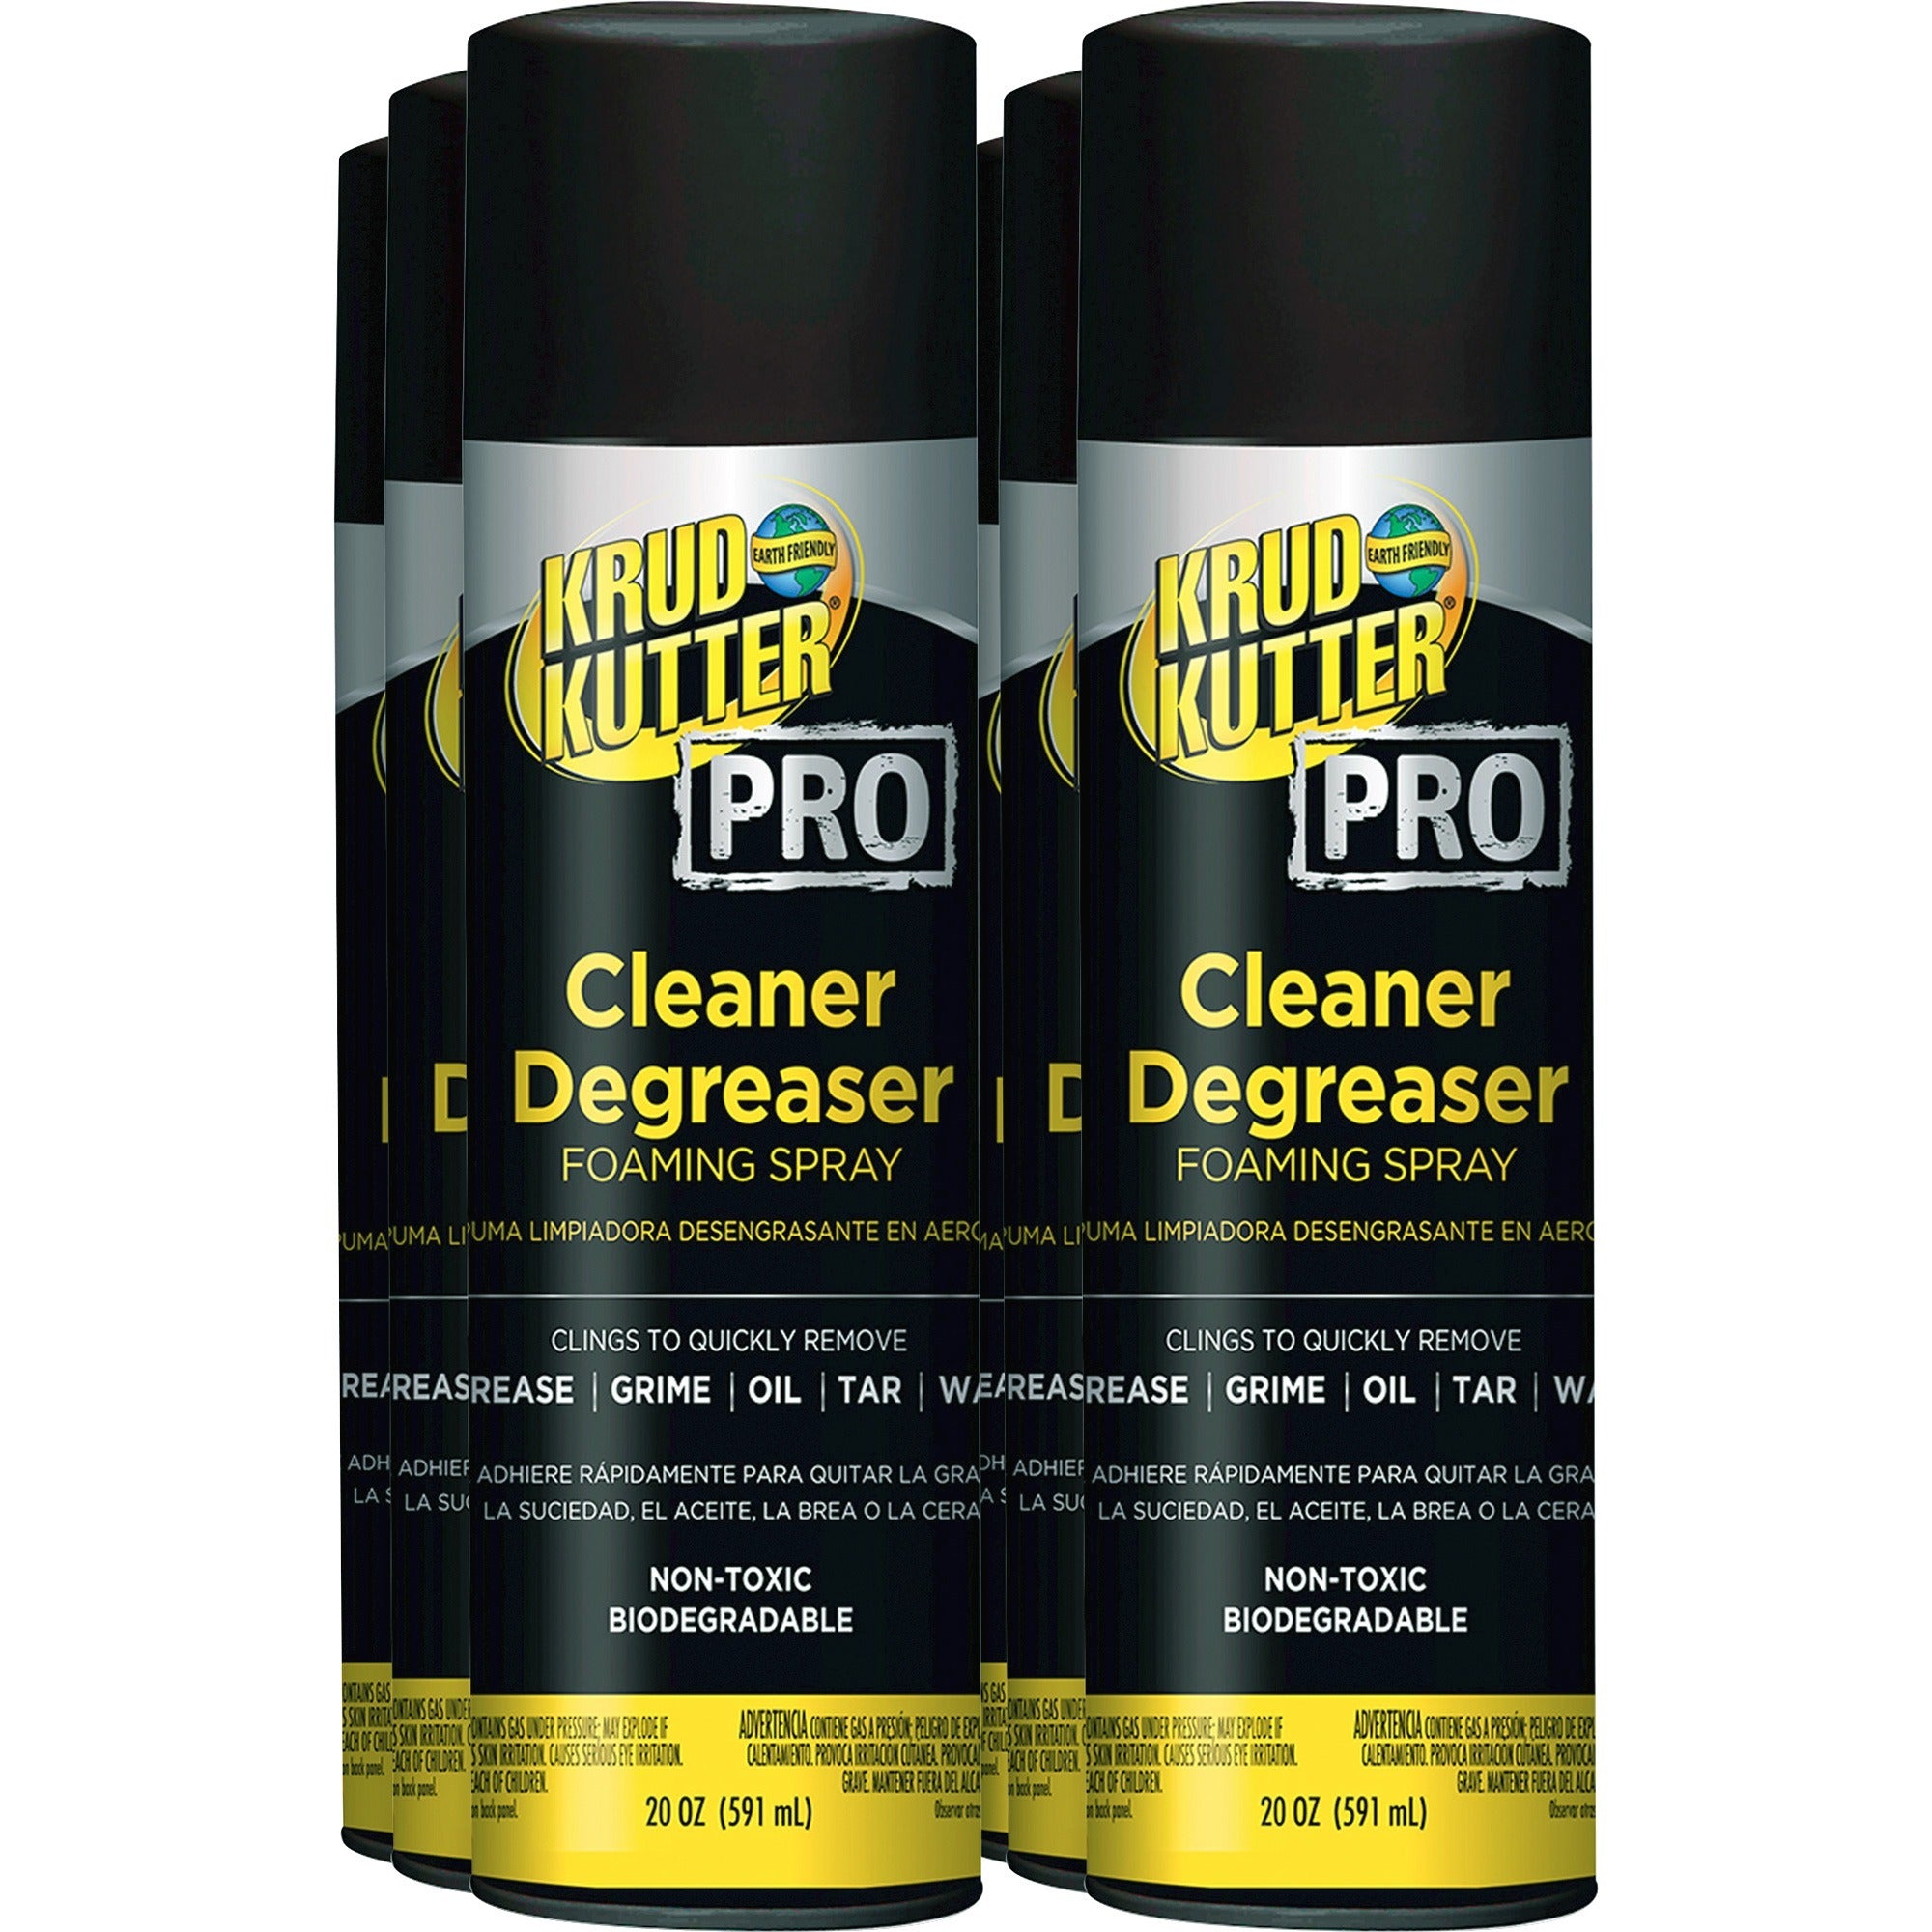 Krud Kutter PRO Cleaner Degreaser - Concentrate - 20 fl oz (0.6 quart) - 6 / Carton - Heavy Duty, Chemical-free, Residue-free - Clear